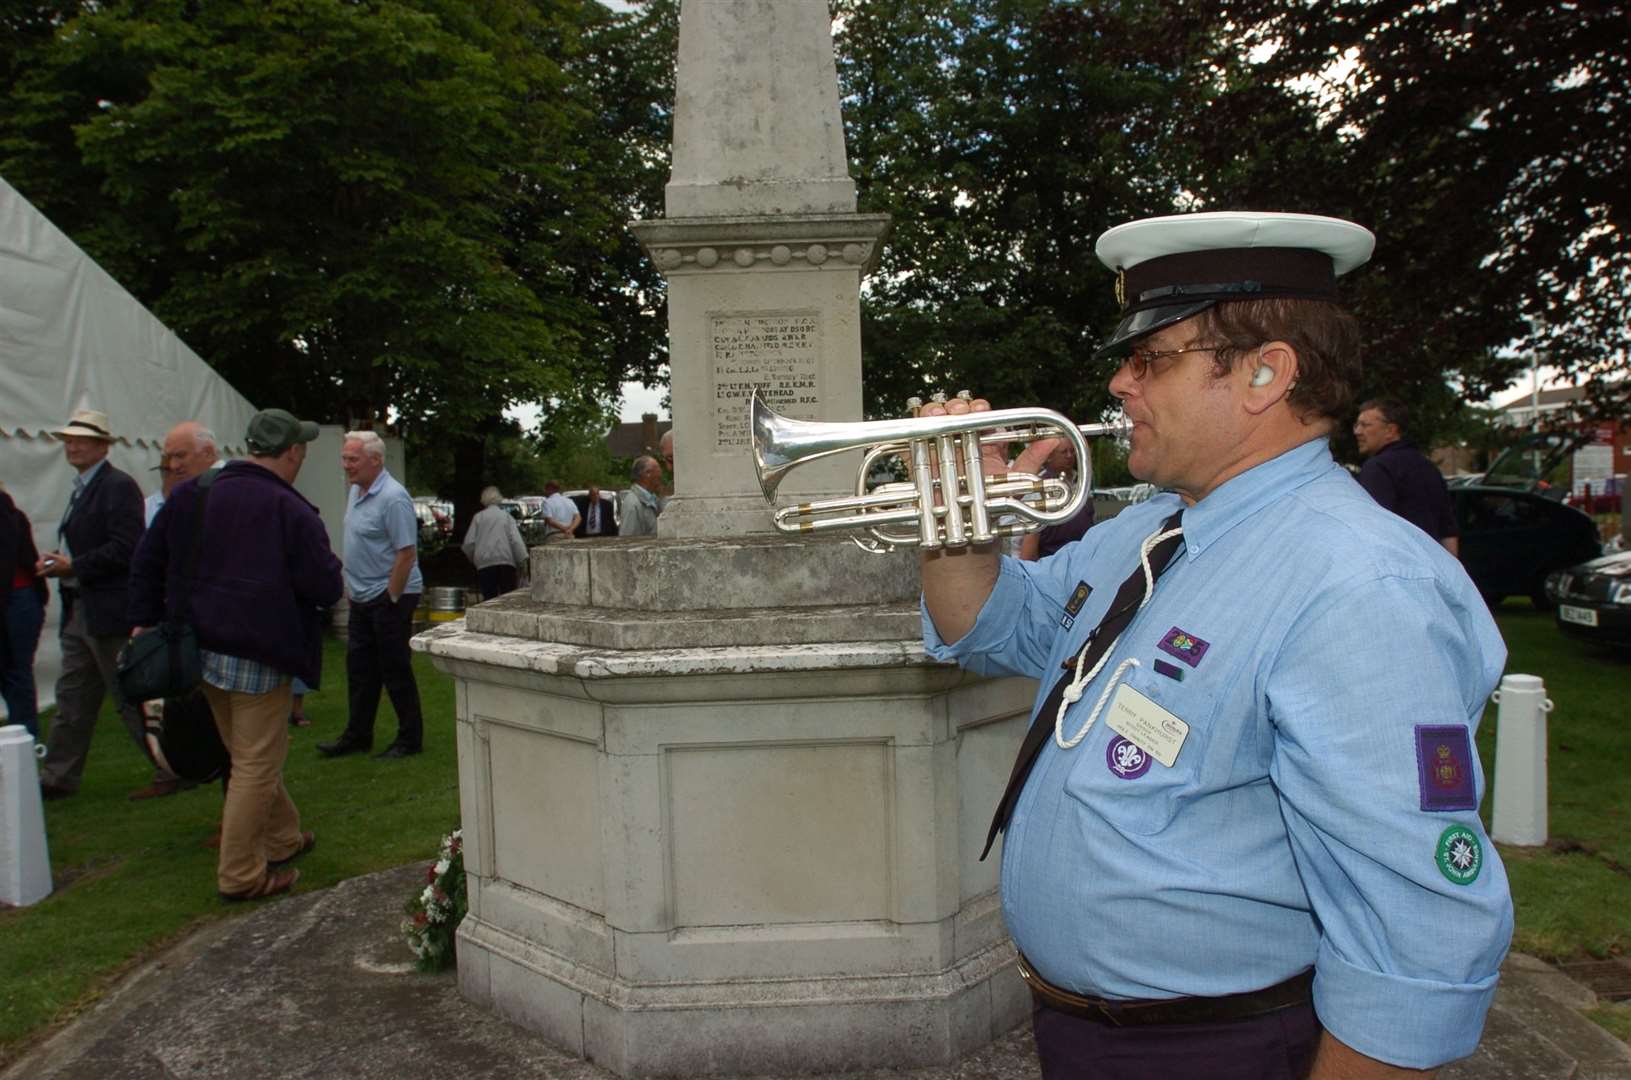 An annual remembrance service is held at the Colin Blythe memorial at the Spitfire Ground